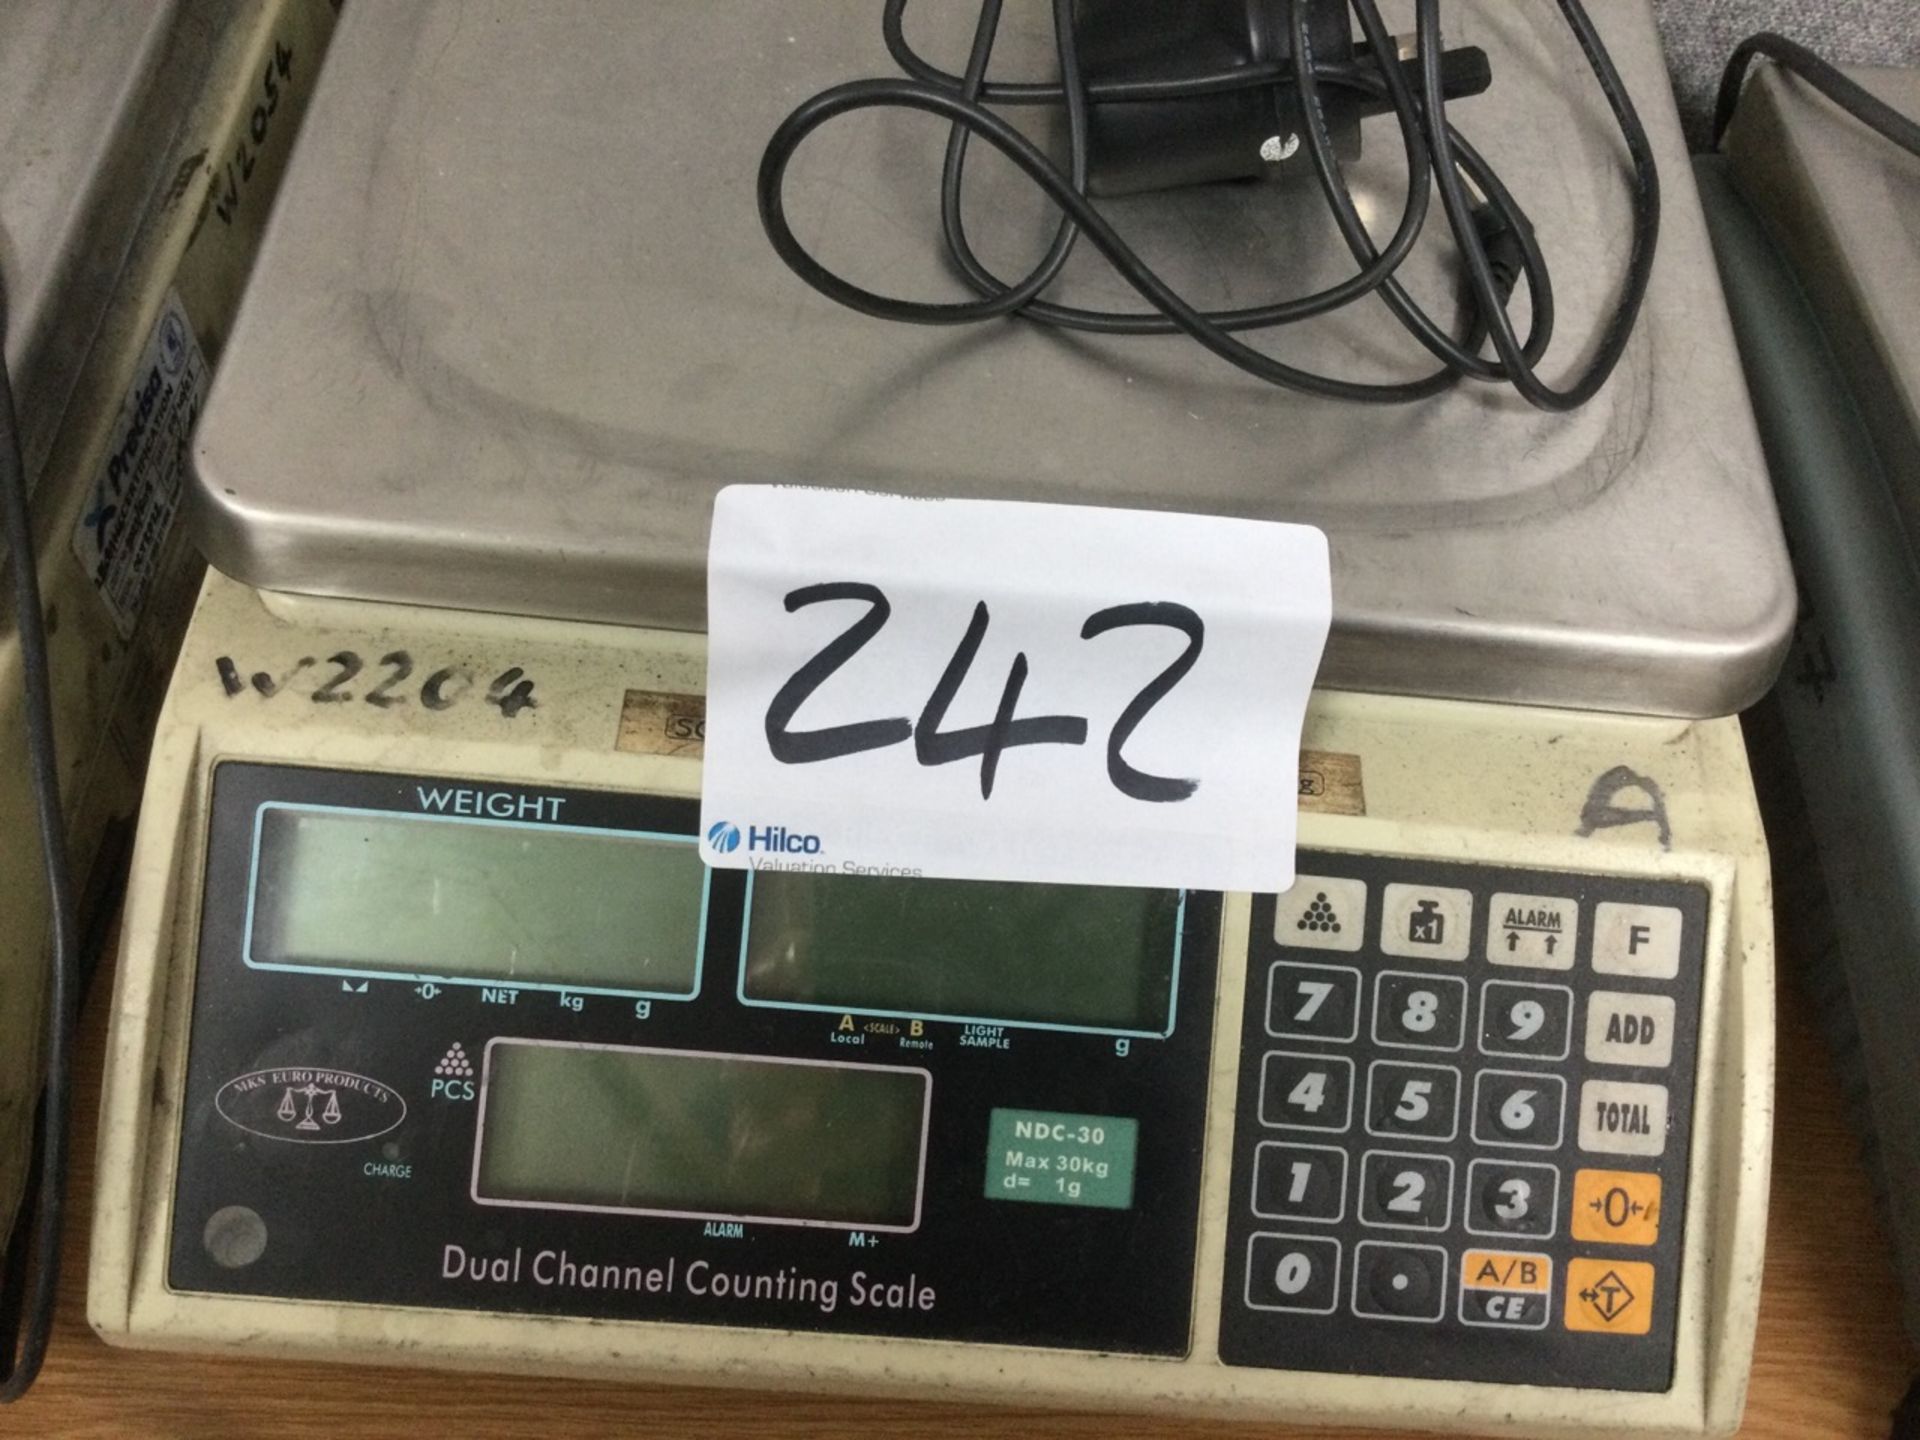 1 Precisa , Electronic Counting Scales,